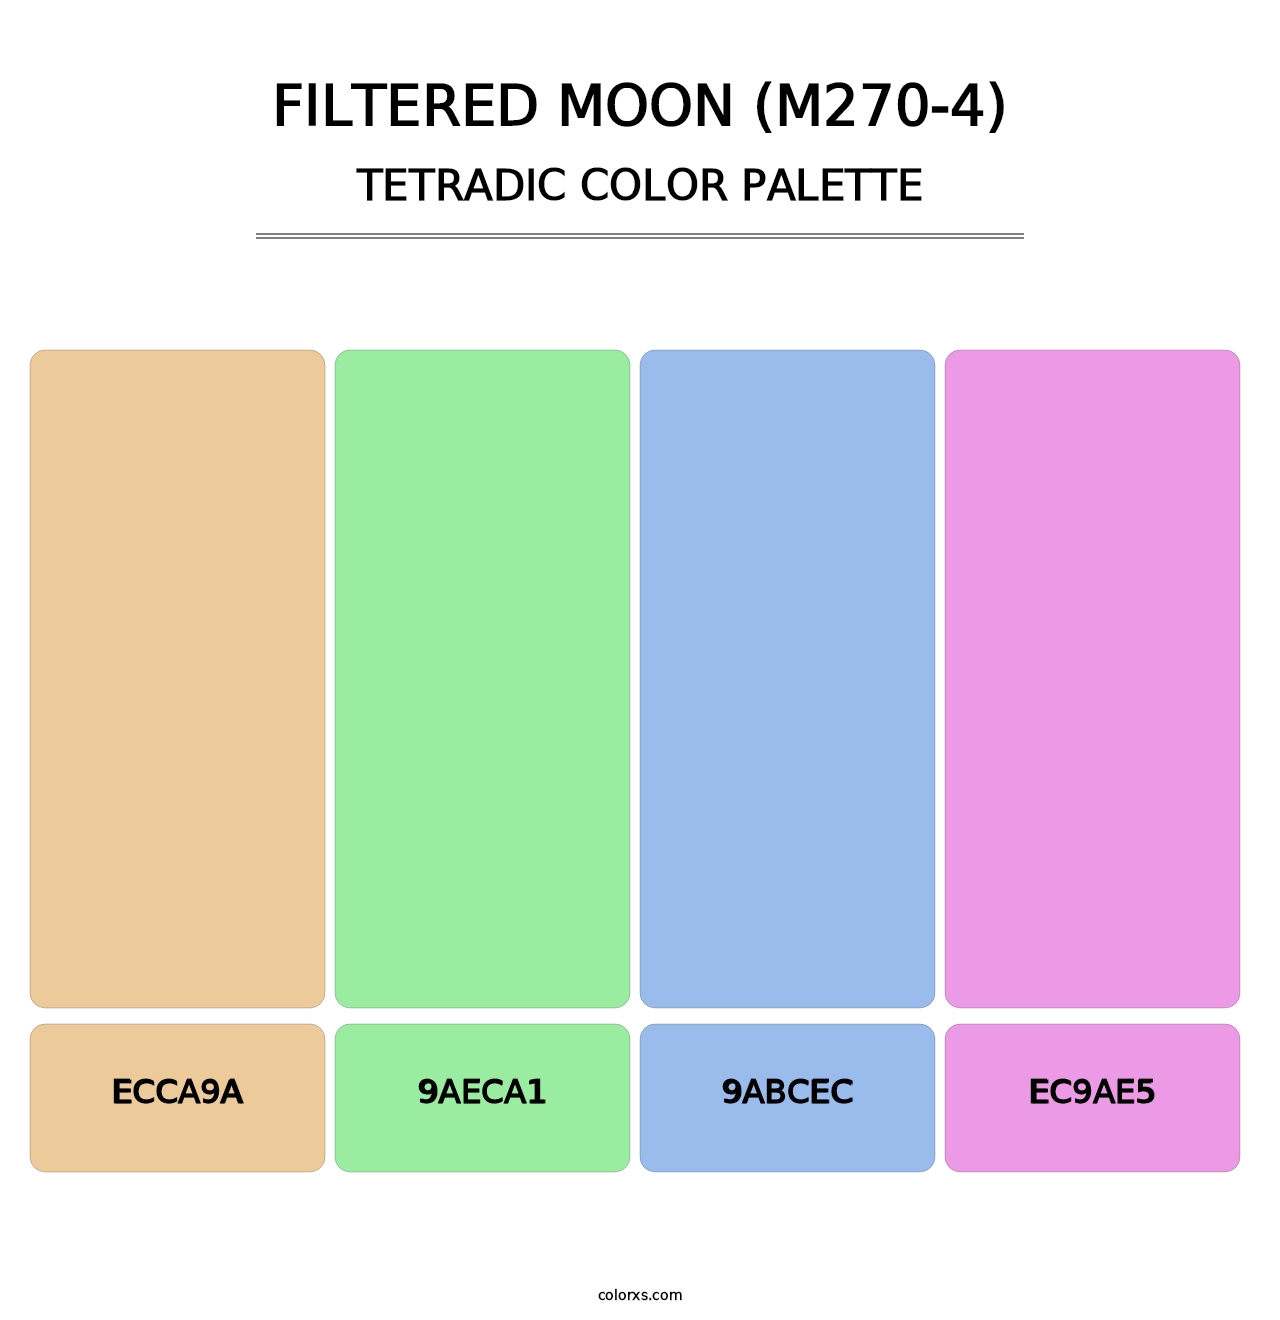 Filtered Moon (M270-4) - Tetradic Color Palette